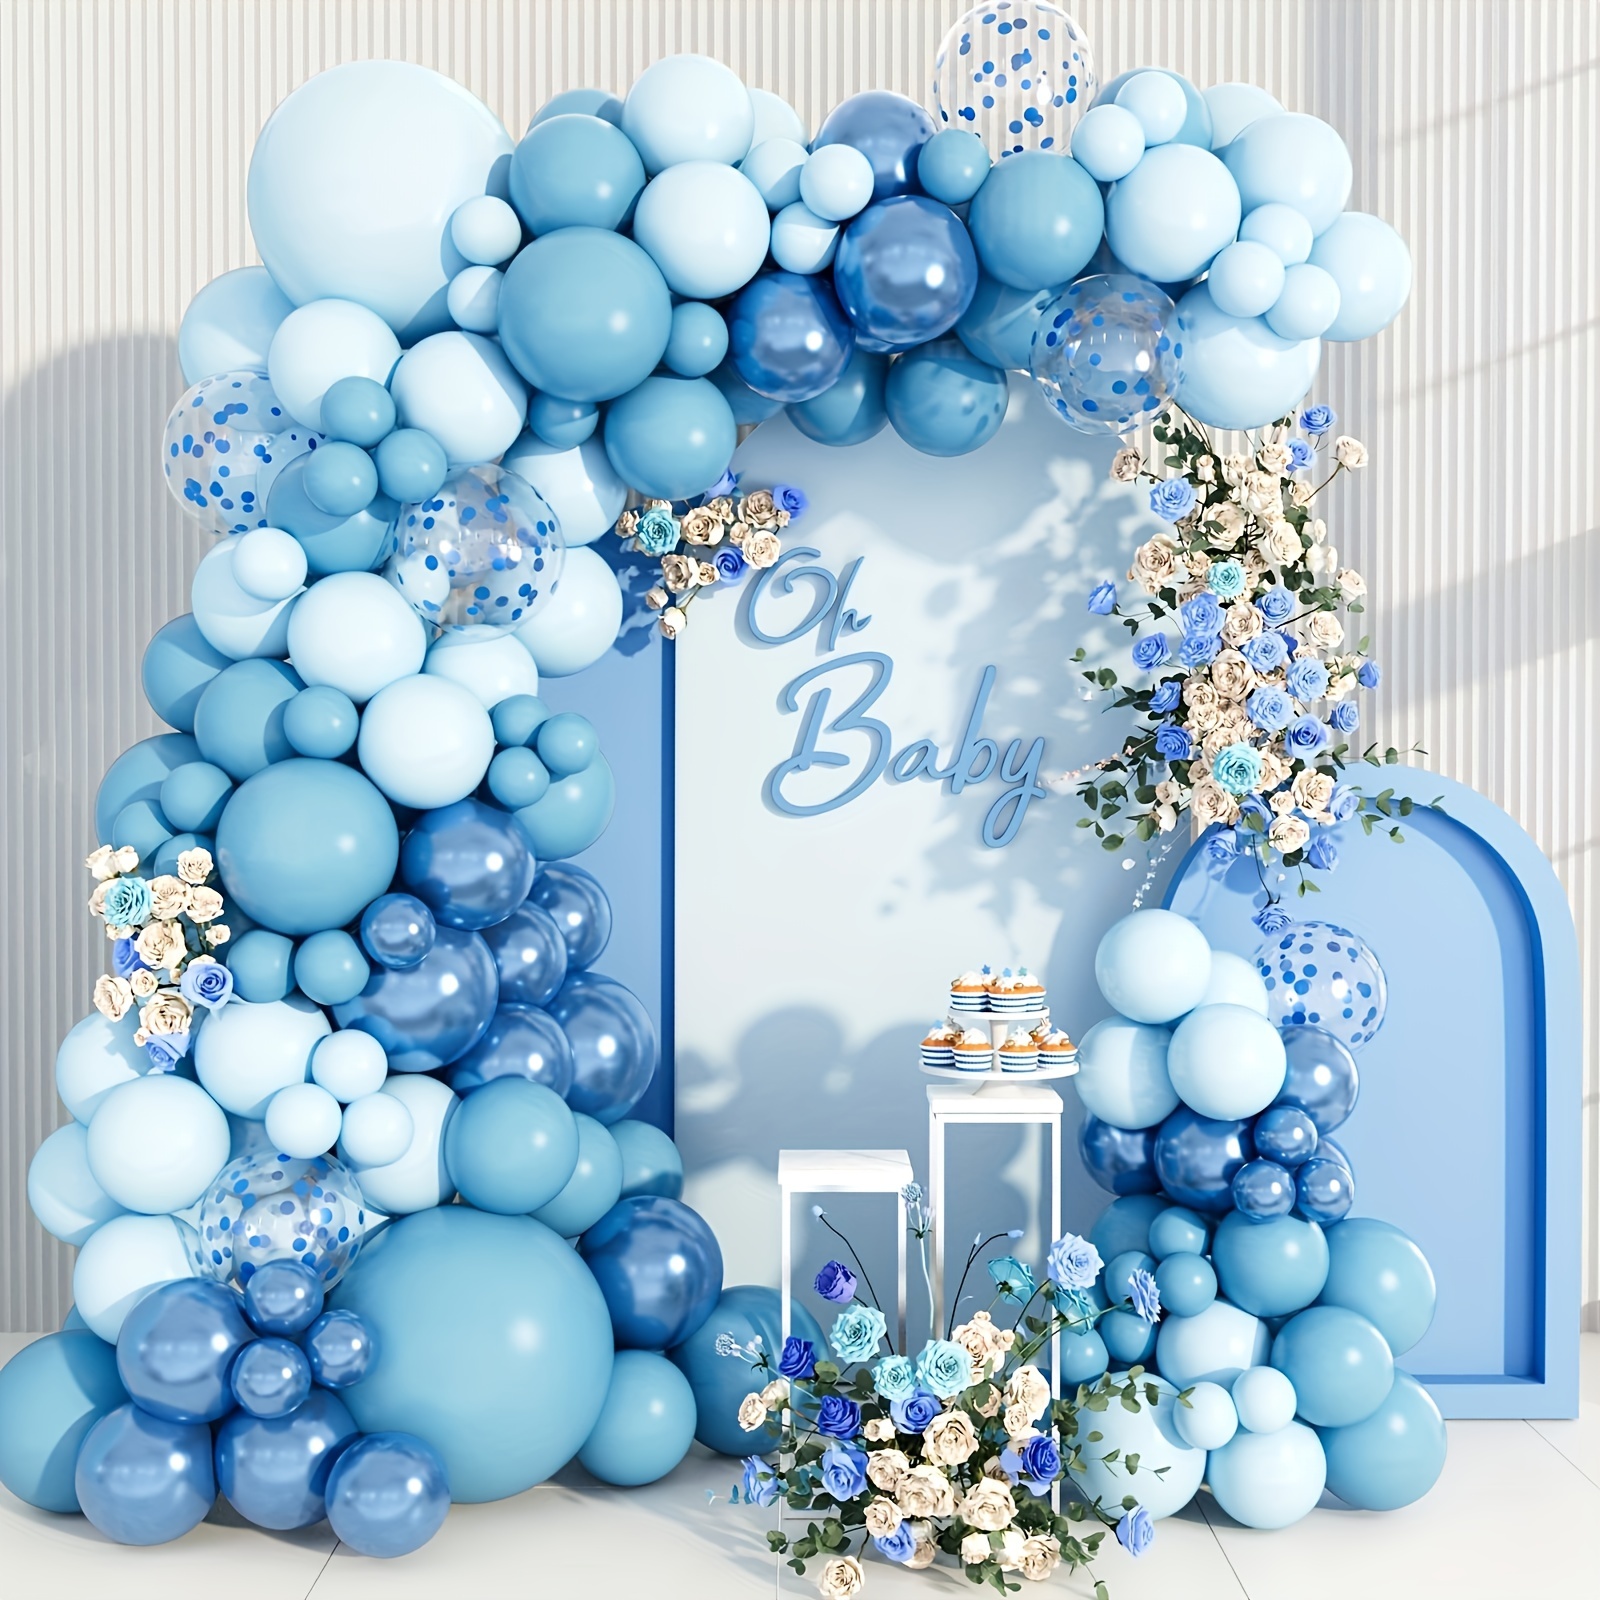 

141pcs, Baby Blue Balloon Garland Arch Kit- Perfect For Baby Shower, Birthday, Wedding, Ocean Themed Party, Birthday Photo Prop, Anniversary Party Scene Decor Arrangement, Room Decor